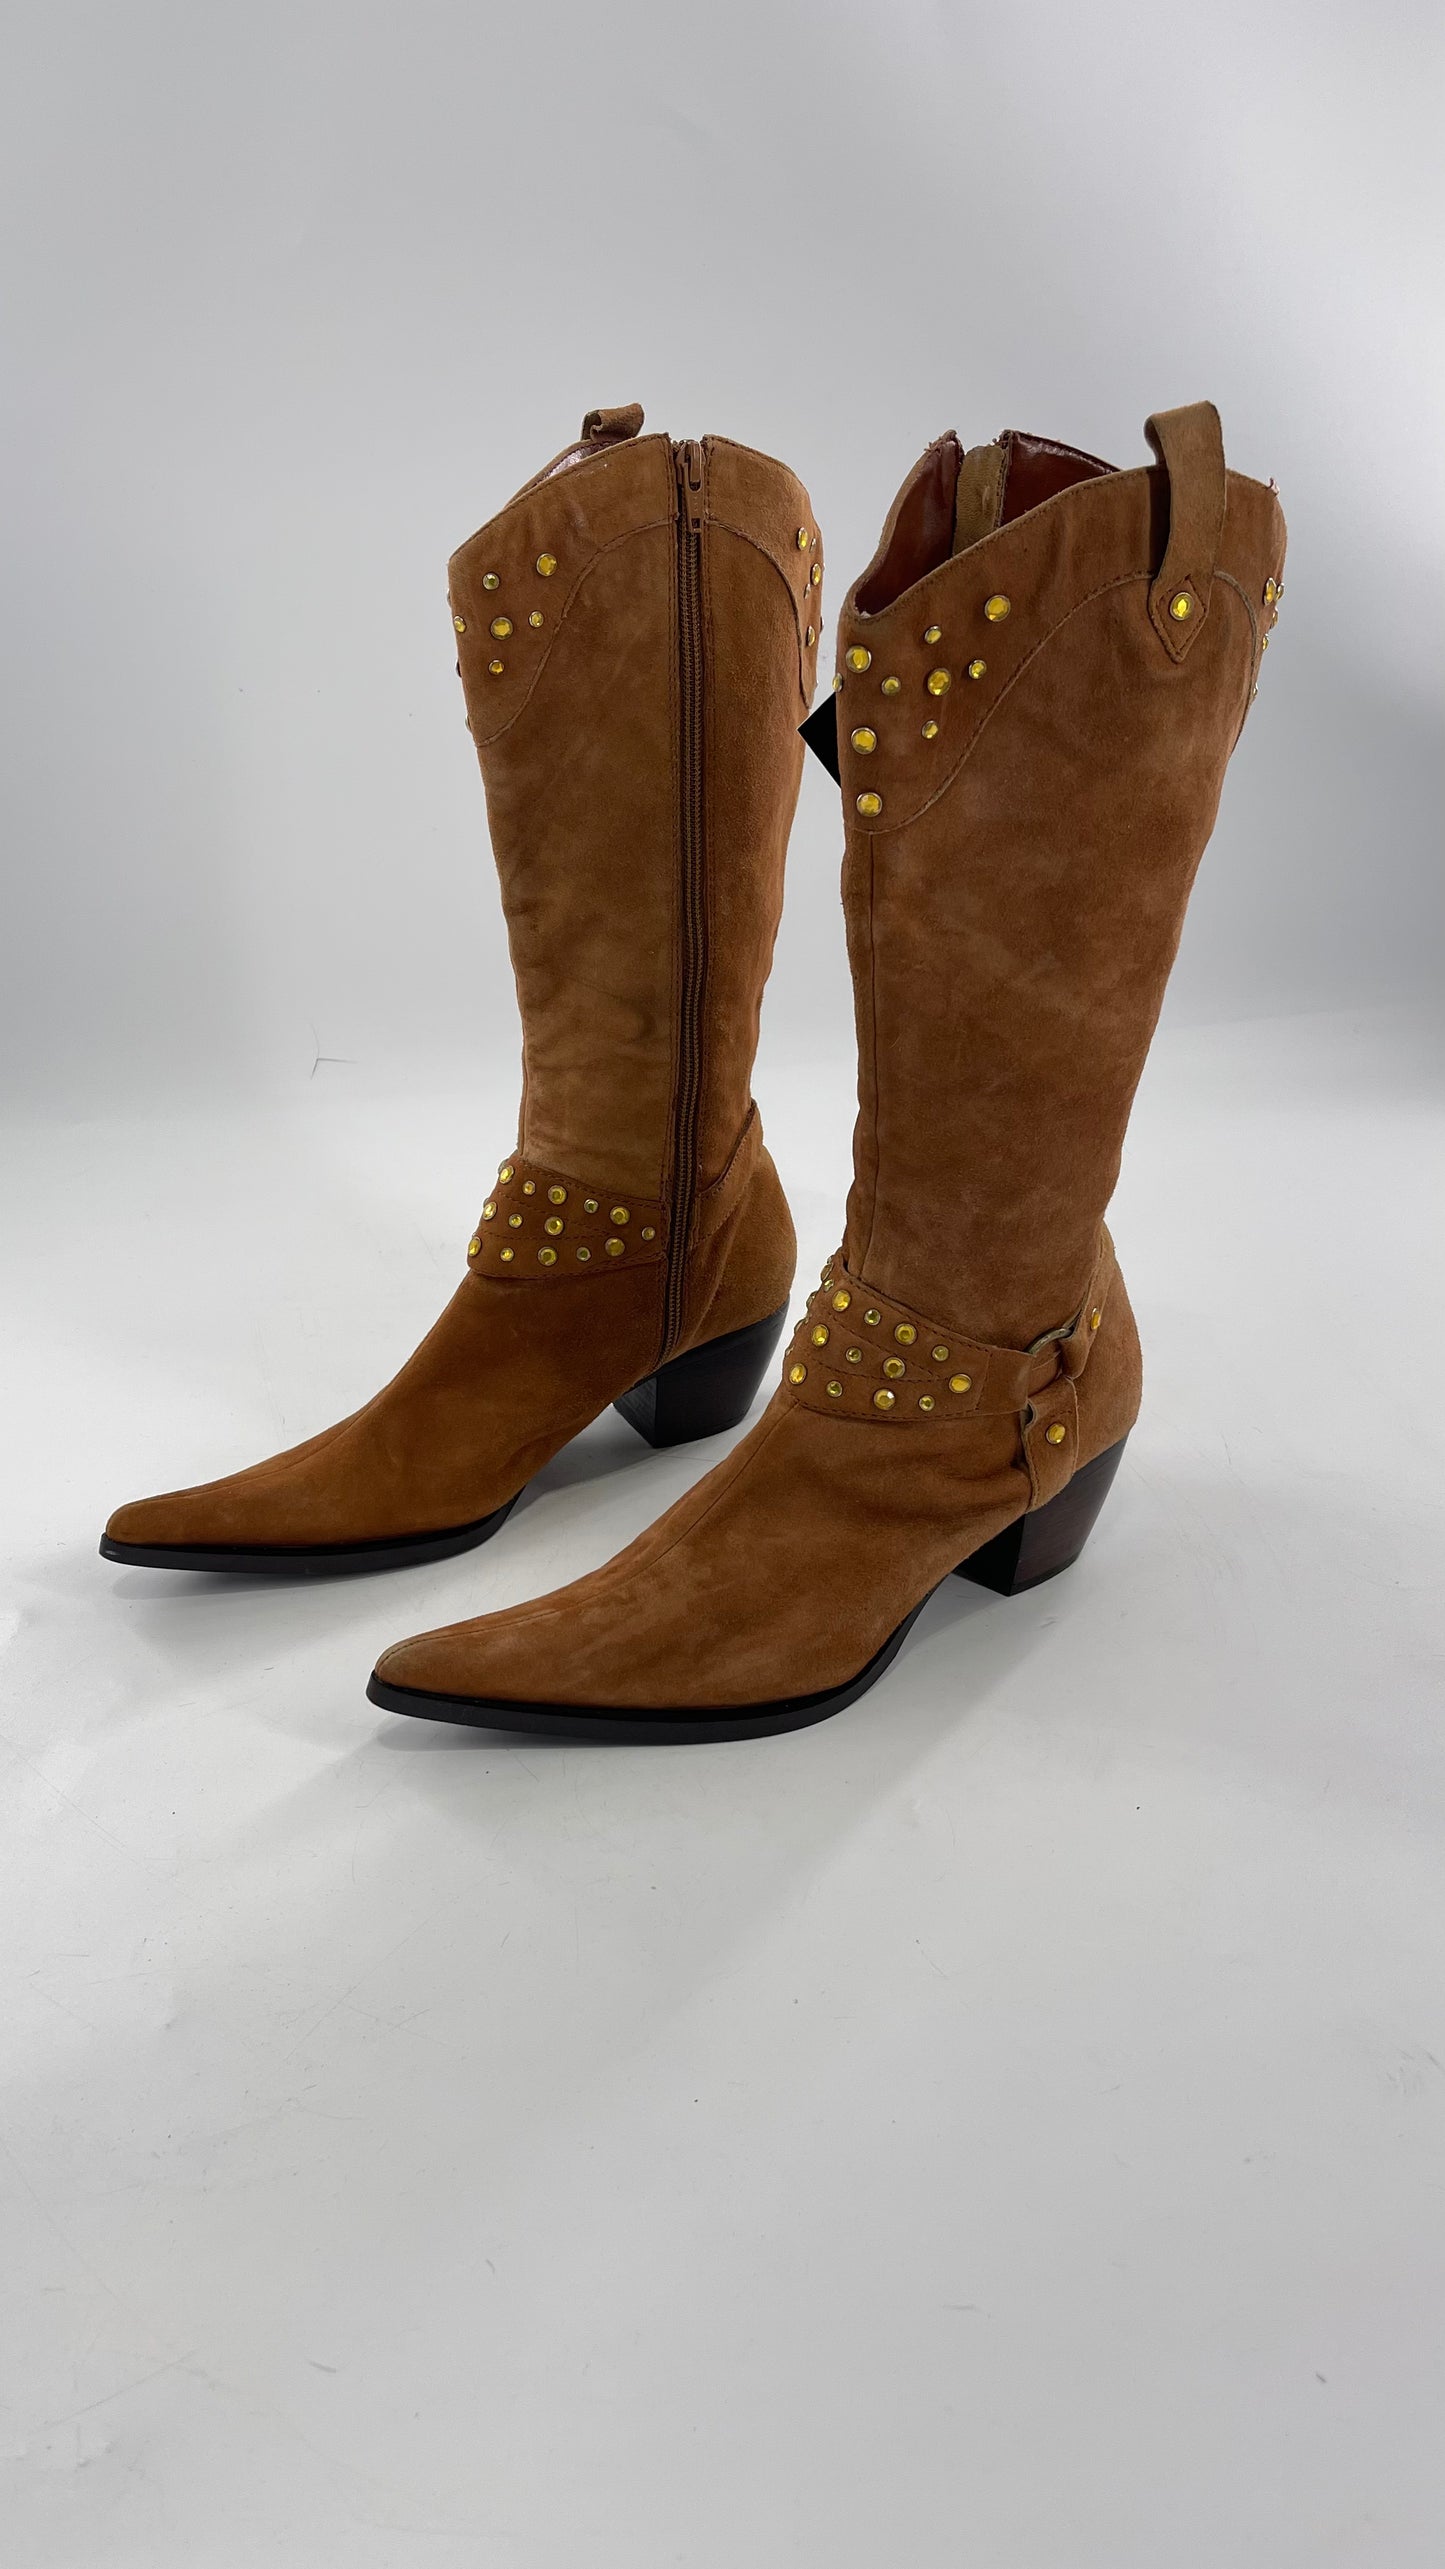 Vintage STEVEN Tan Suede Pointed Cowboy Boots with Yellow Crystal Embellishments (9.5)